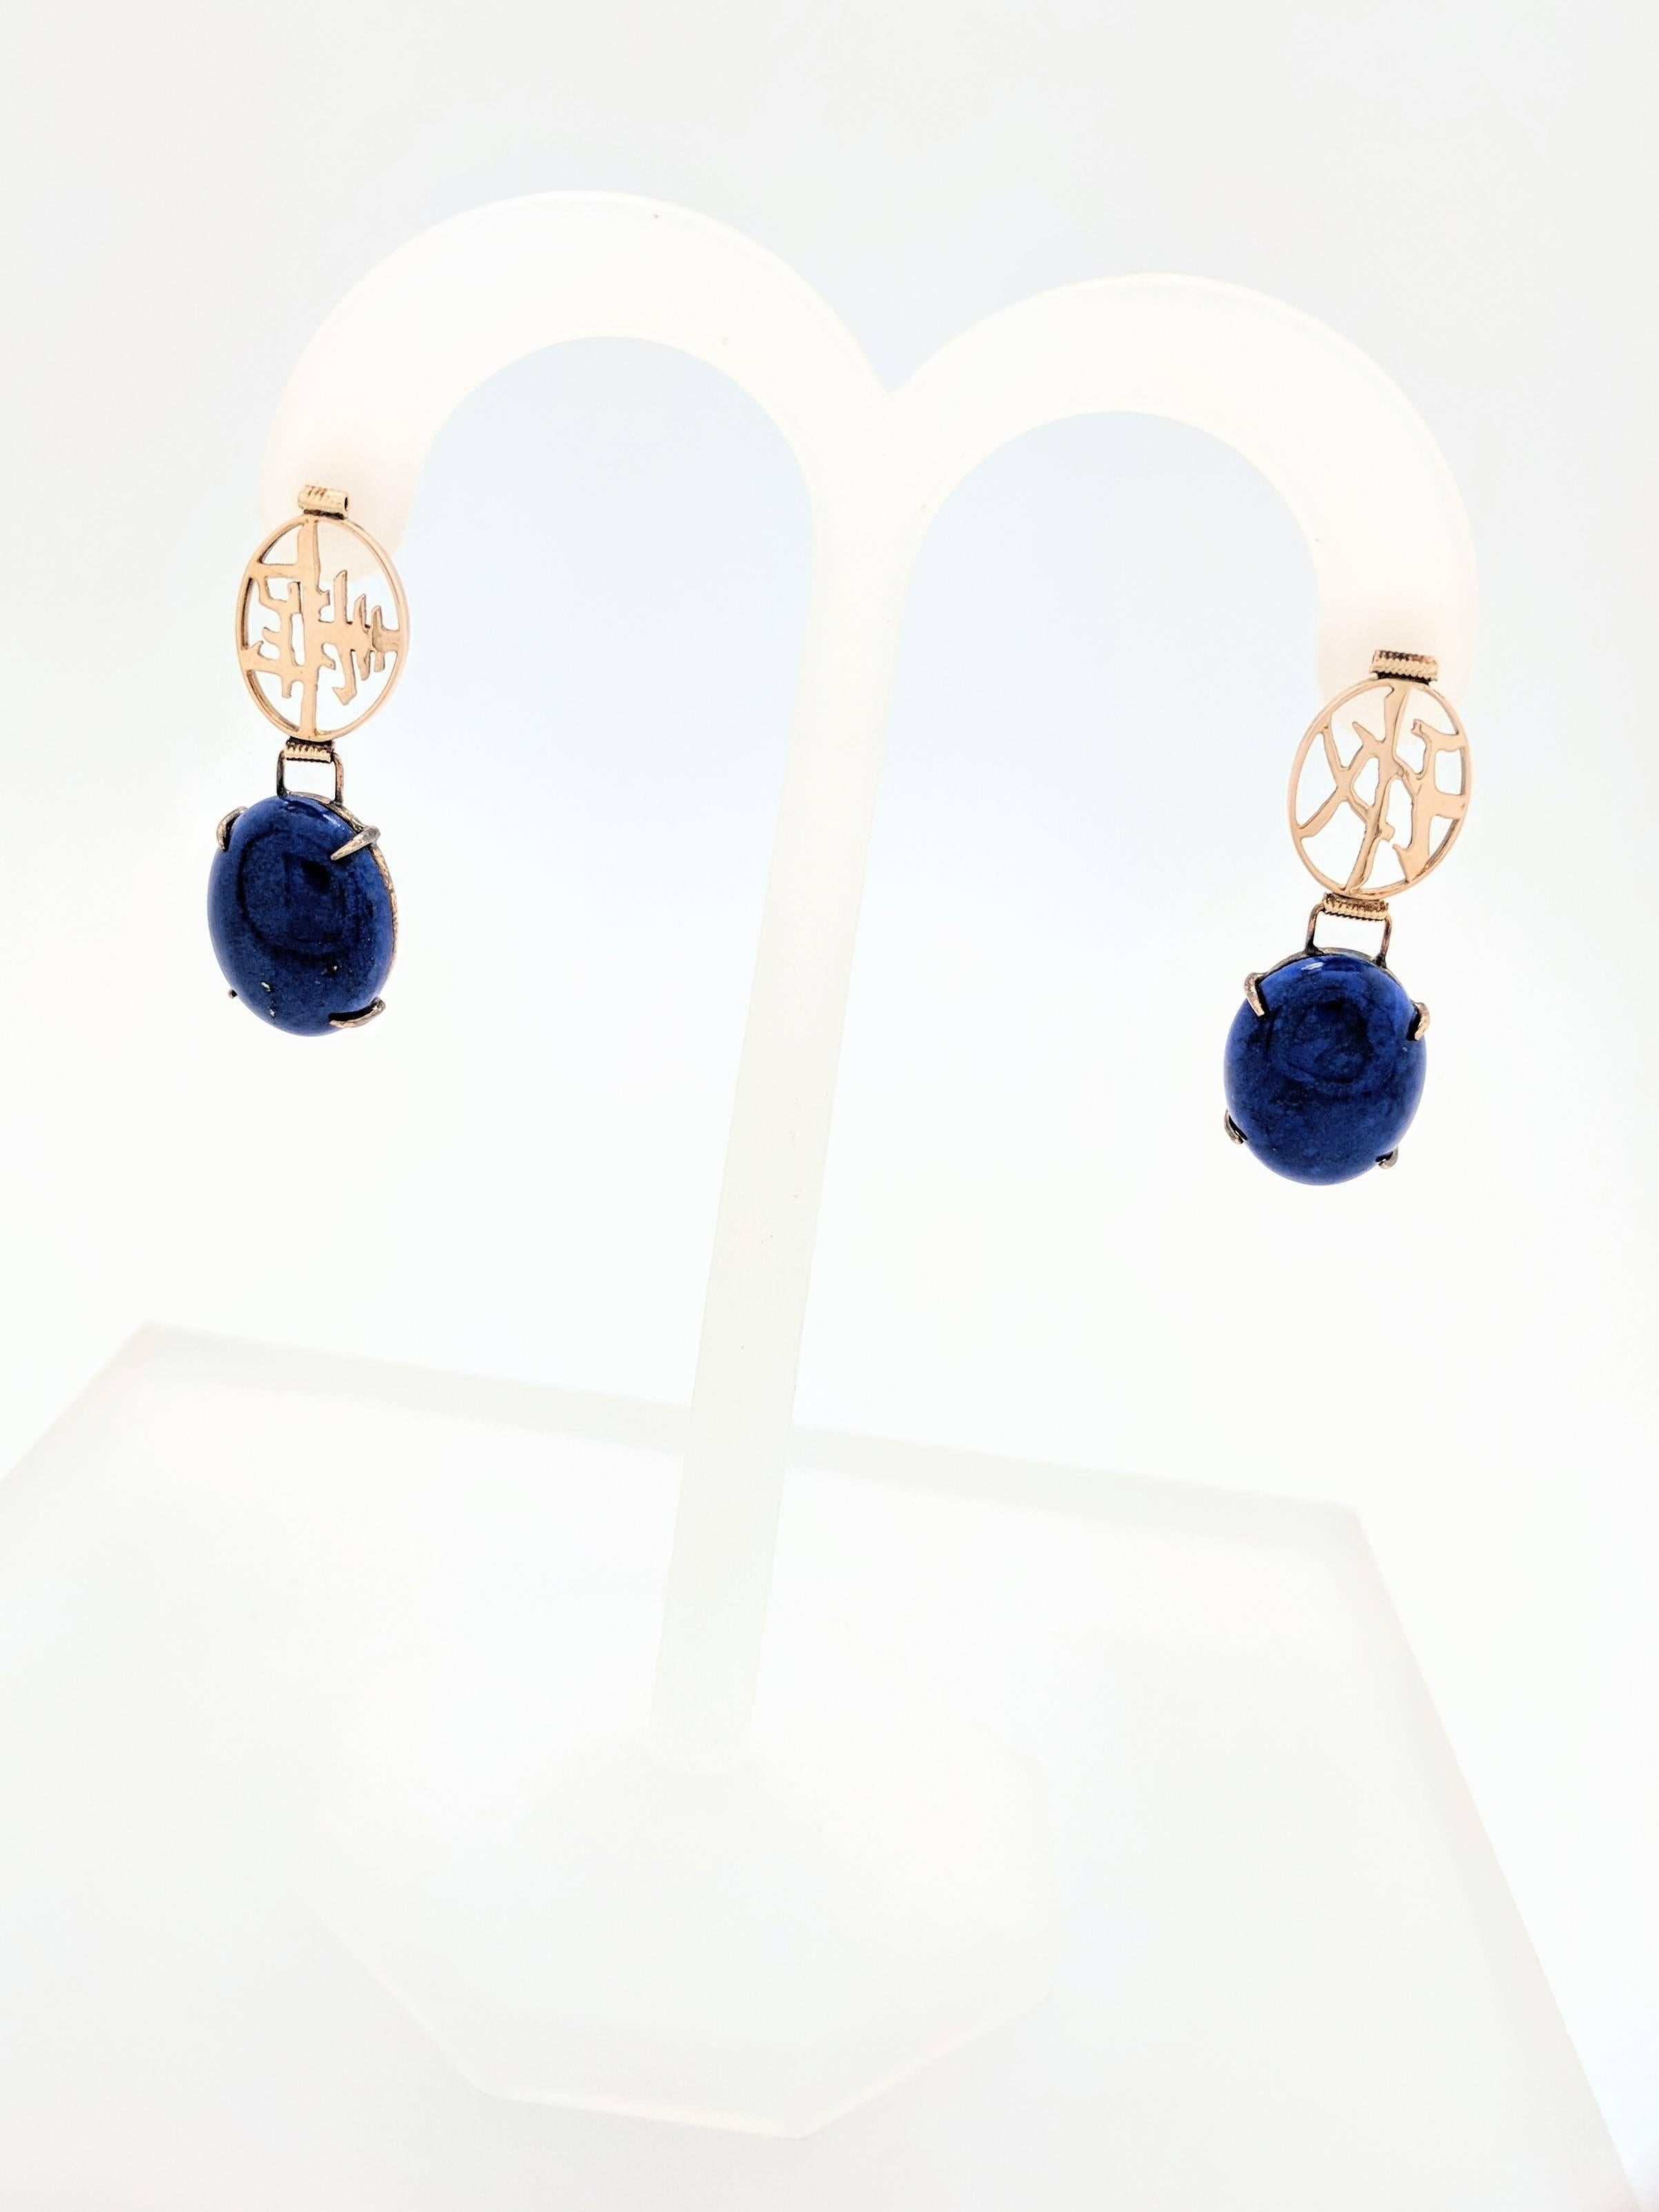 14K Yellow Gold Blue Lapis Peace & Long Life Chinese Symbol Dangle Drop Earrings

You are viewing a beautiful pair of Blue Lapis Peace & Long Life Chinese Symbol Dangle Drop Earrings. These earrings are crafted from 14k yellow gold and weighs 5.3